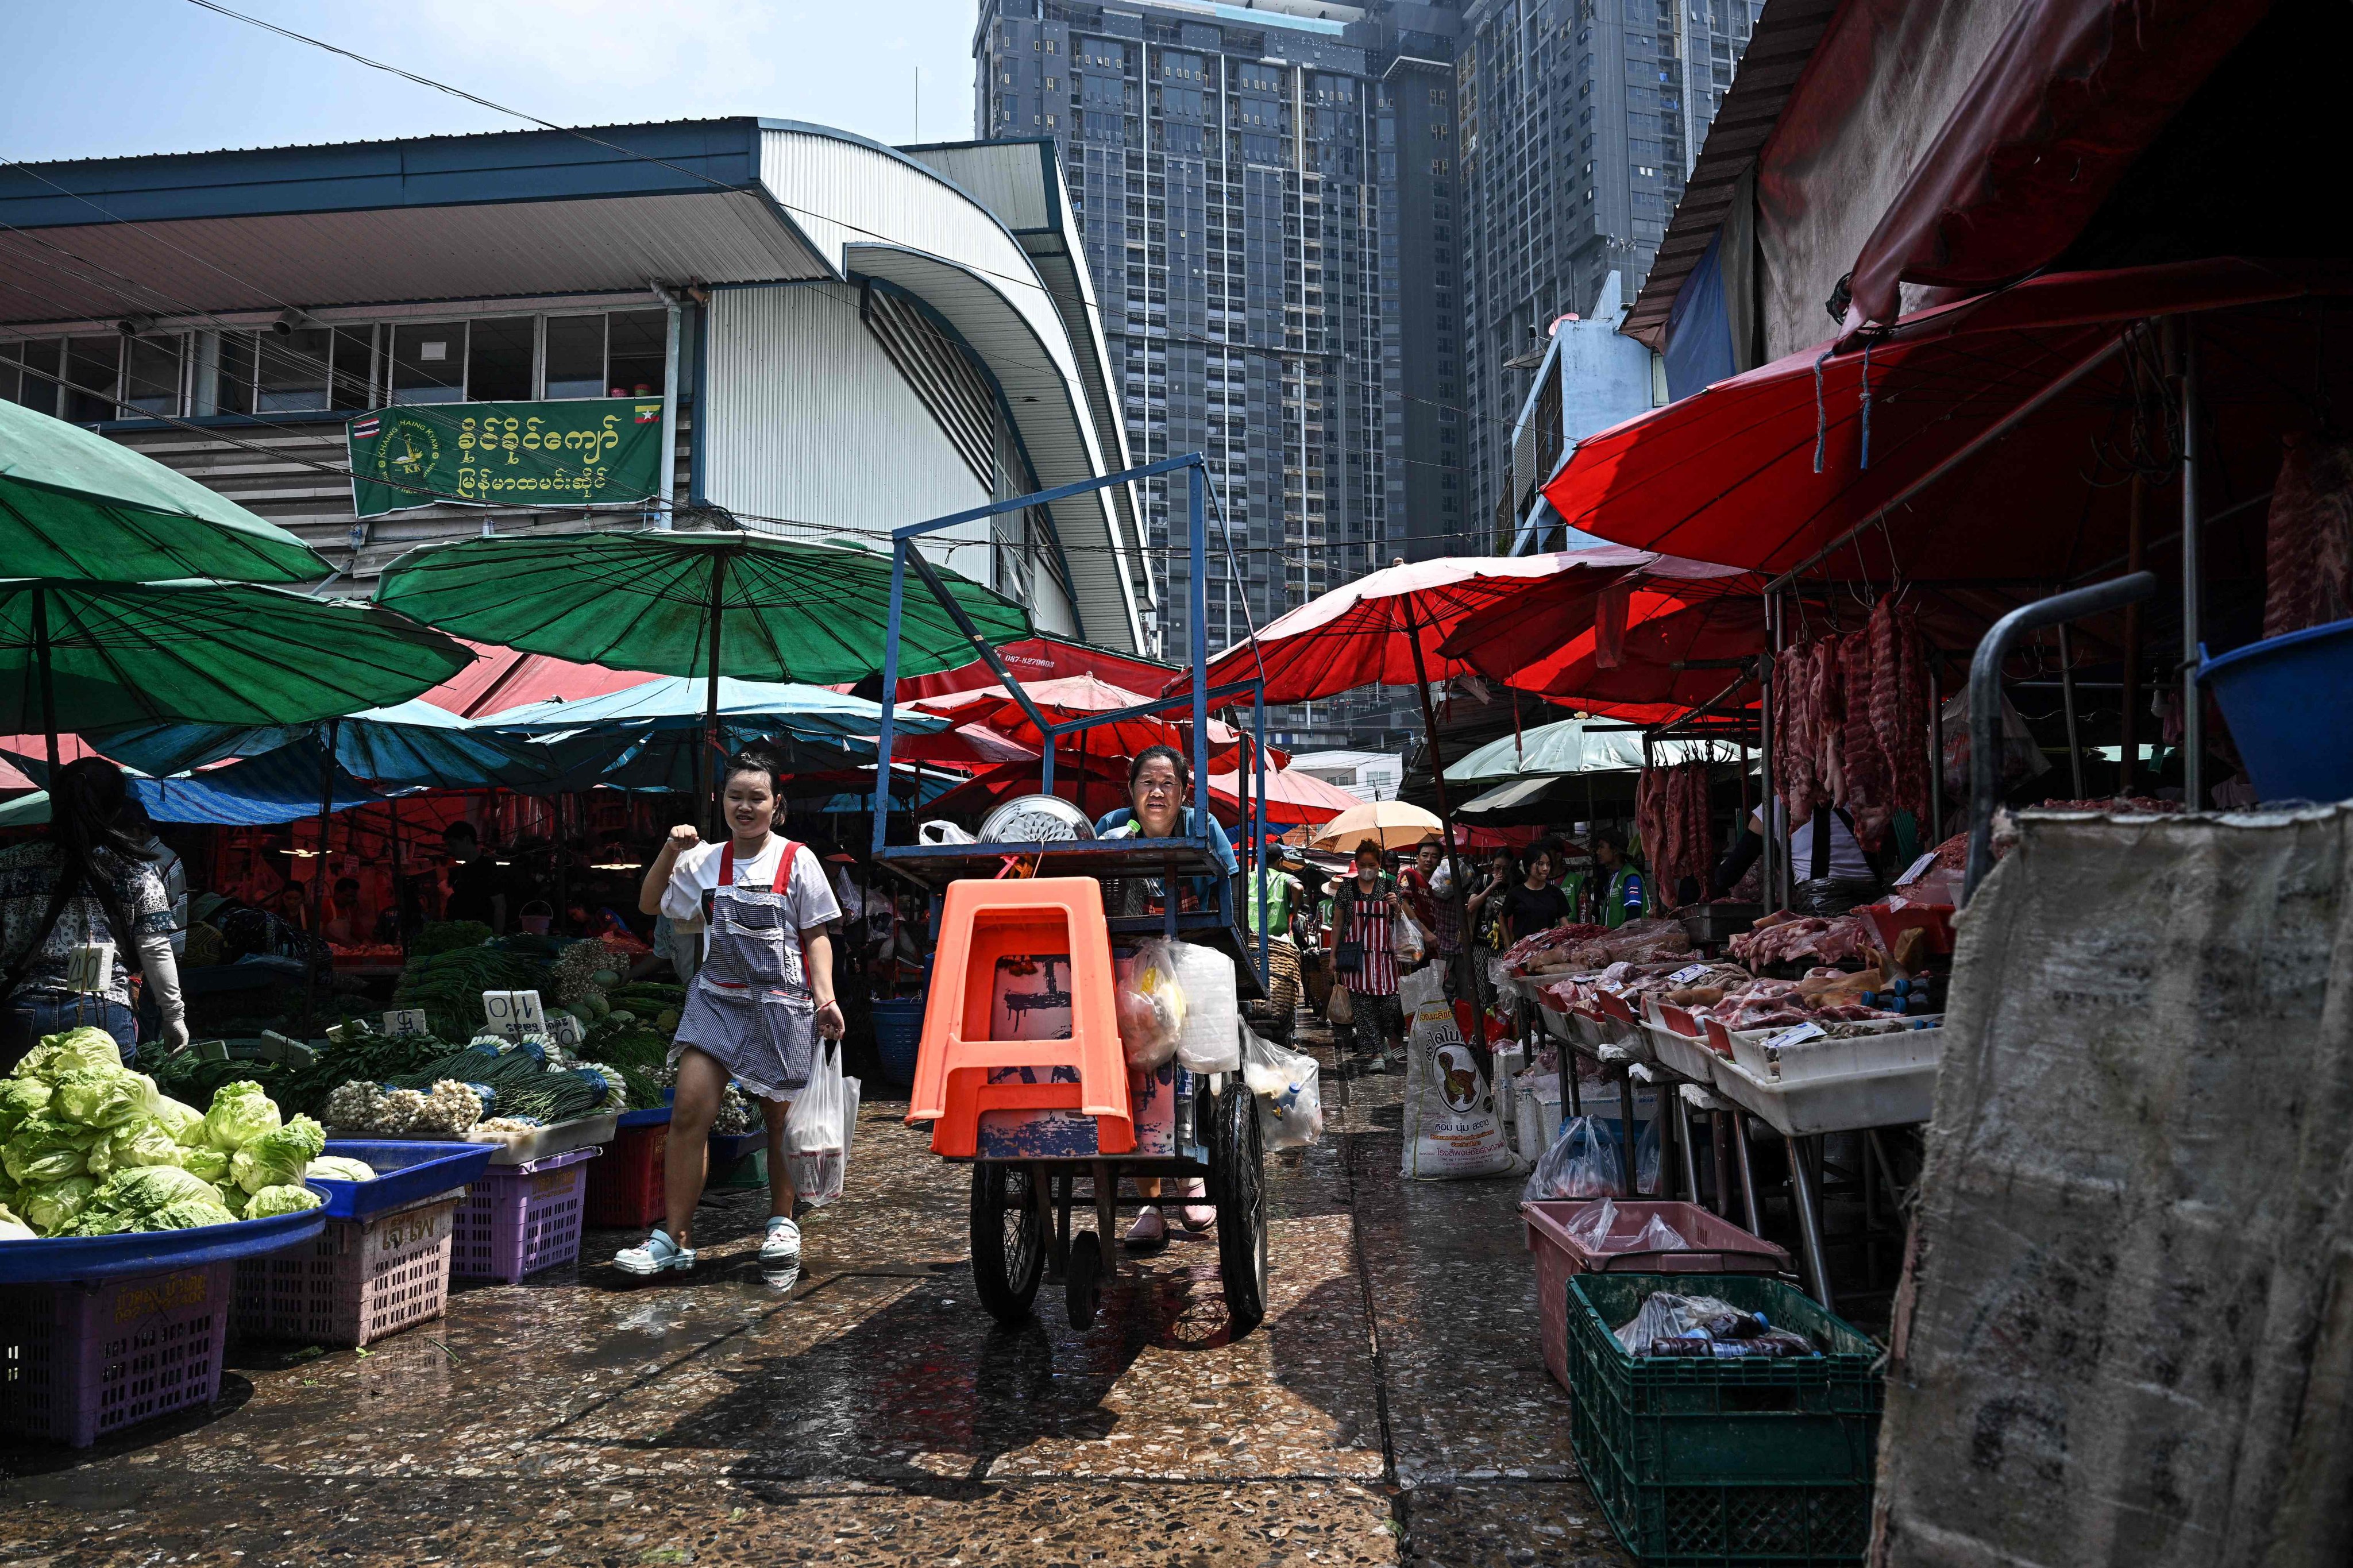 A vendor moves a cart through a market in Bangkok. Thailand’s poor growth performance started well before the pandemic hit. Photo: AFP